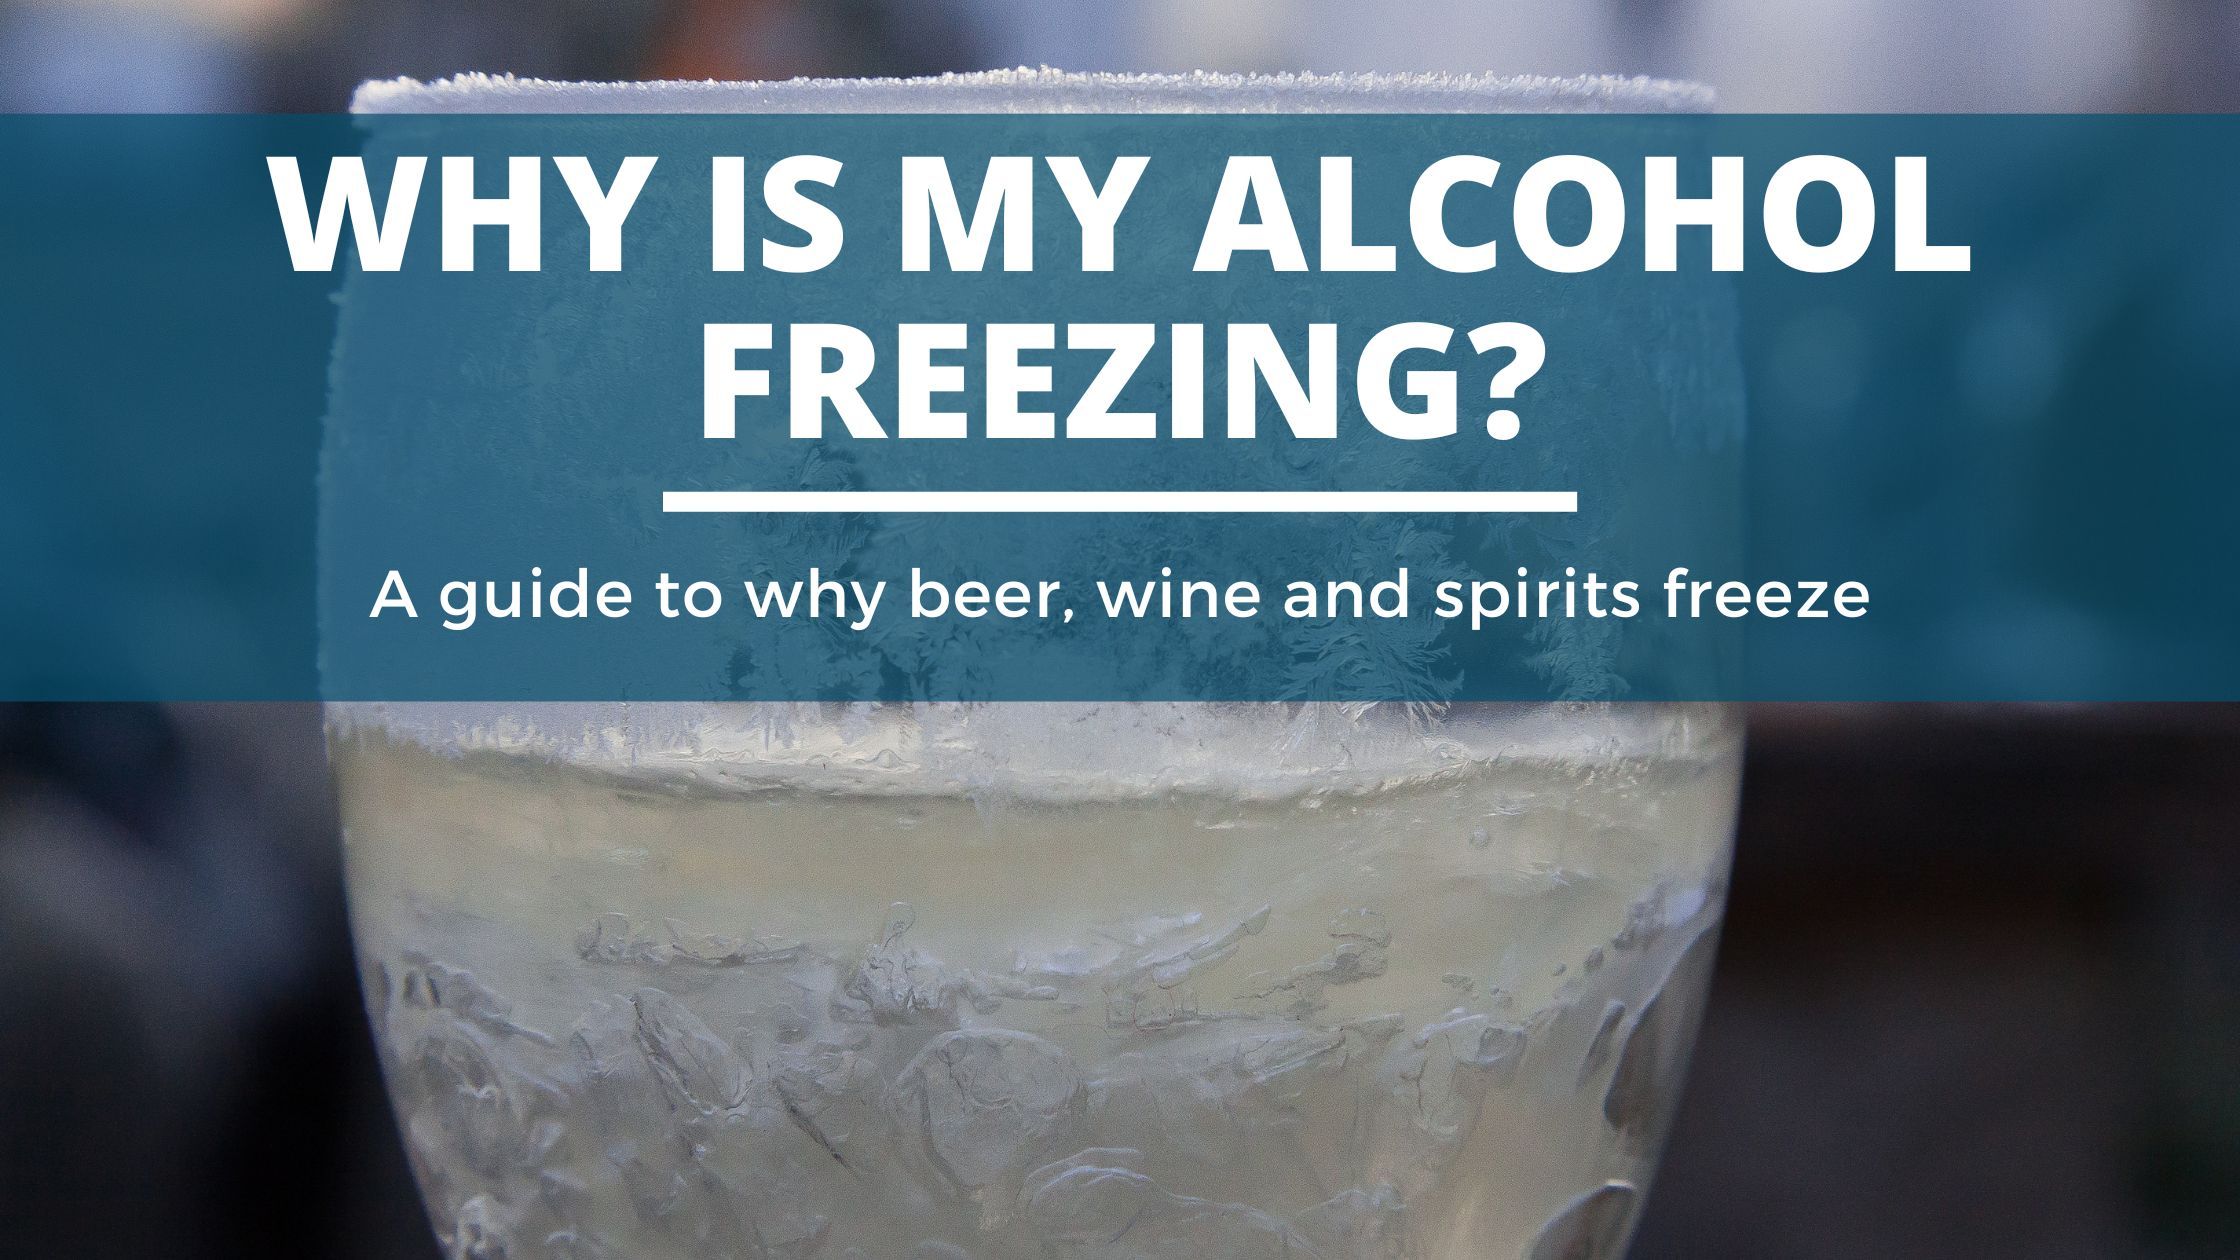 Image of diy distilling how to stop alcohol freezing